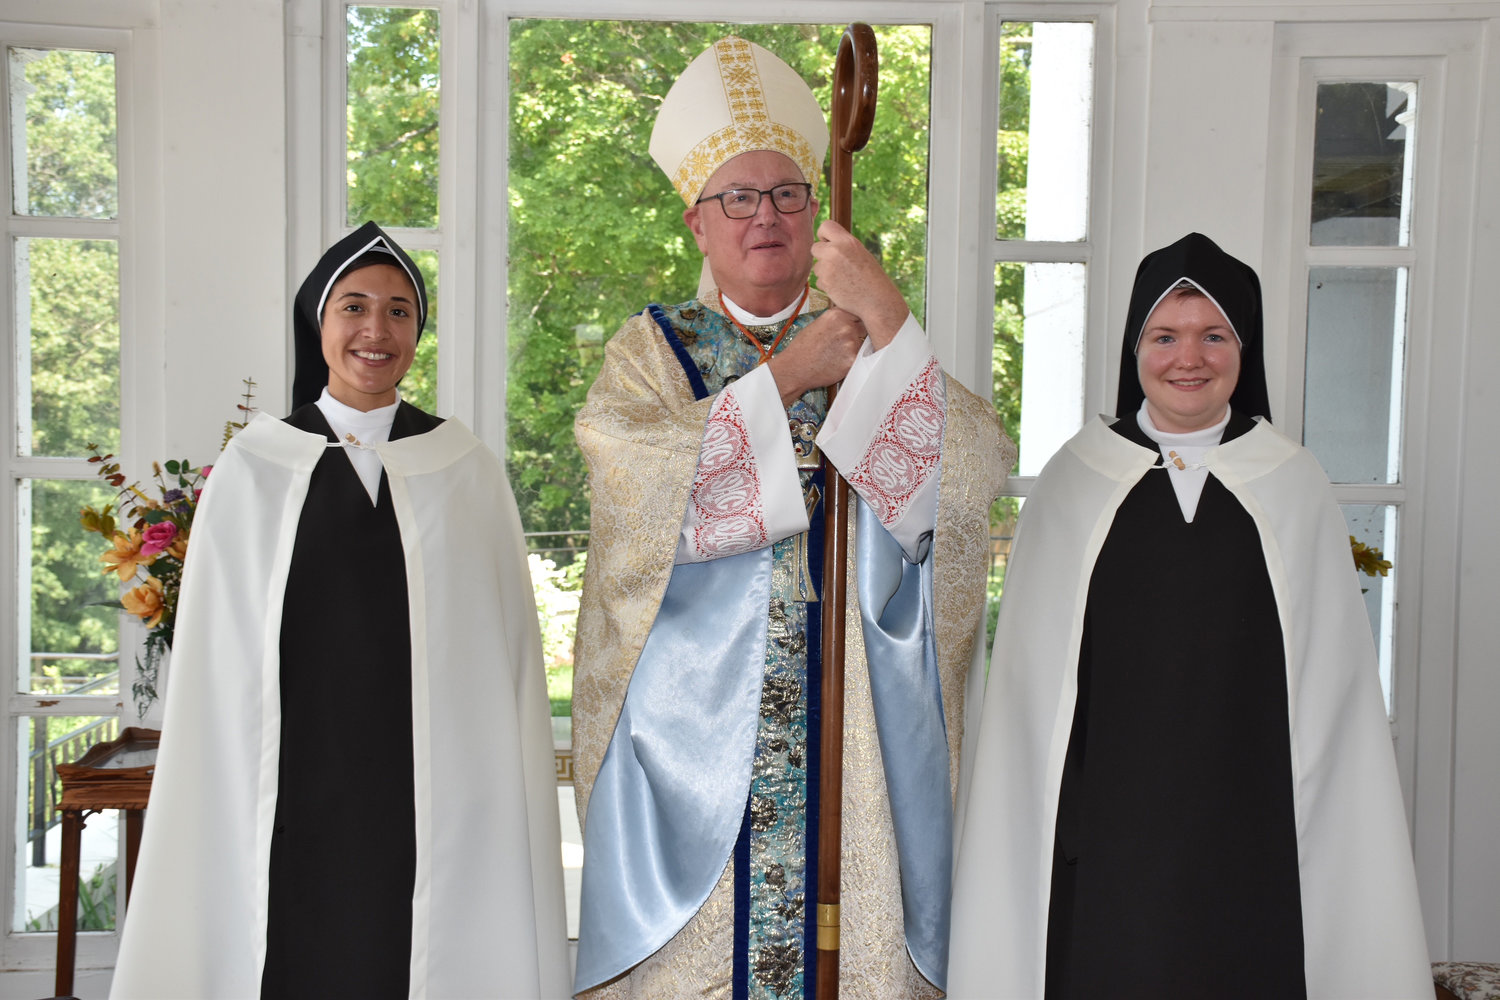 On the day of their first profession, Sister Mary Dolores Carmel, O. Carm., left, and Sister Mary Sharon Rose Carmel Mullin, O. Carm., join Cardinal Dolan at St. Teresa’s Motherhouse in Germantown.